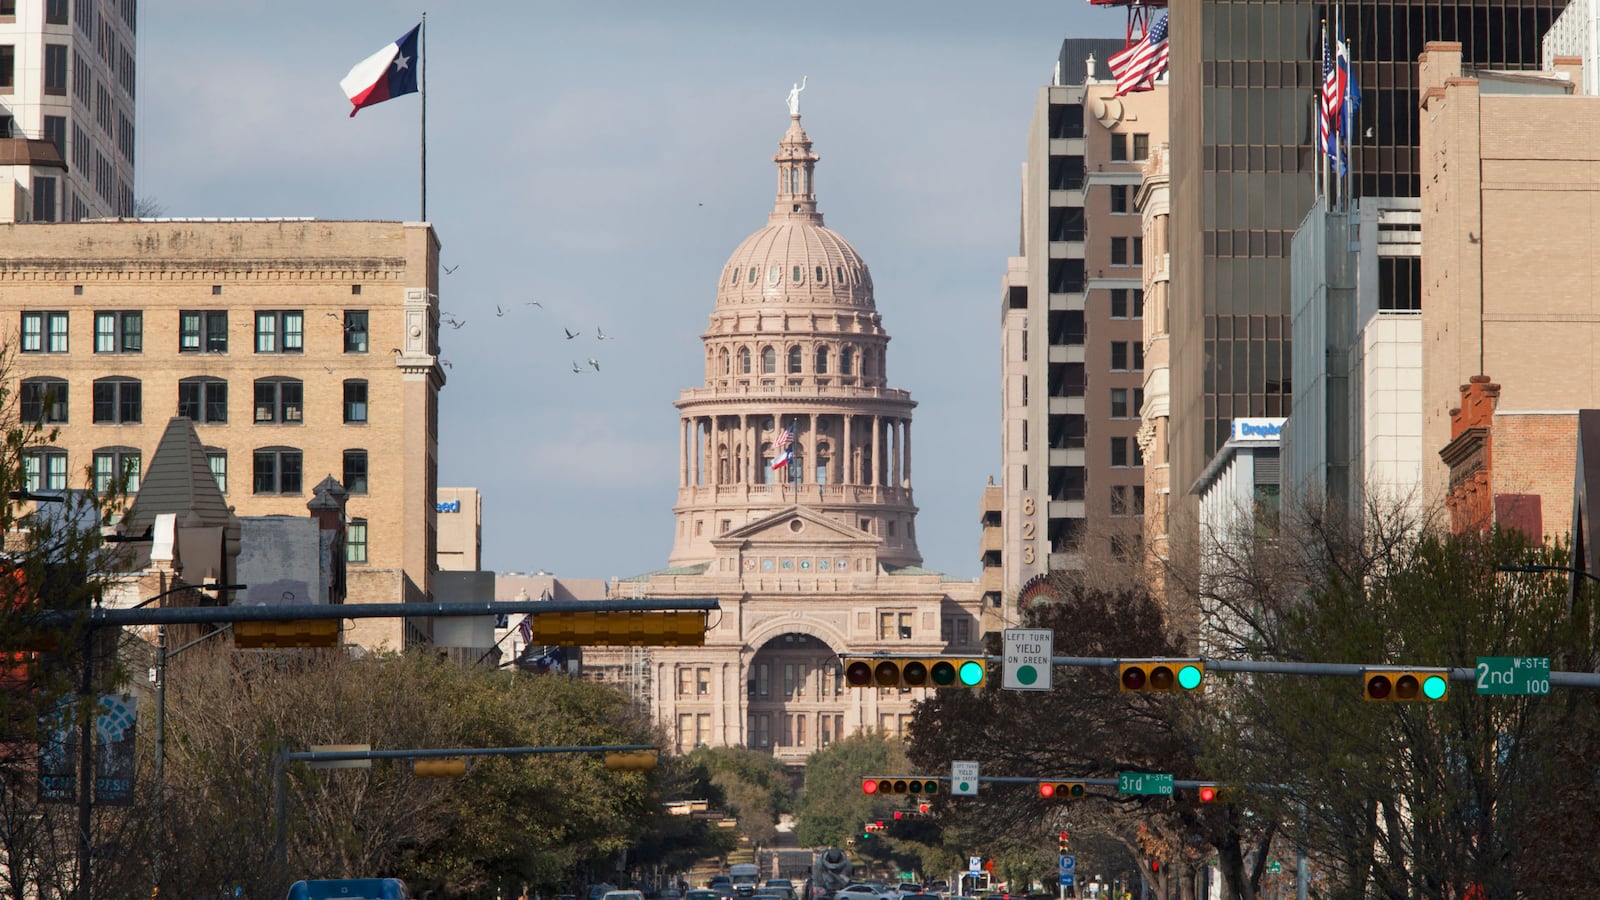 School officials in Austin, Texas applied to be part of a school integration program launched under President Obama.